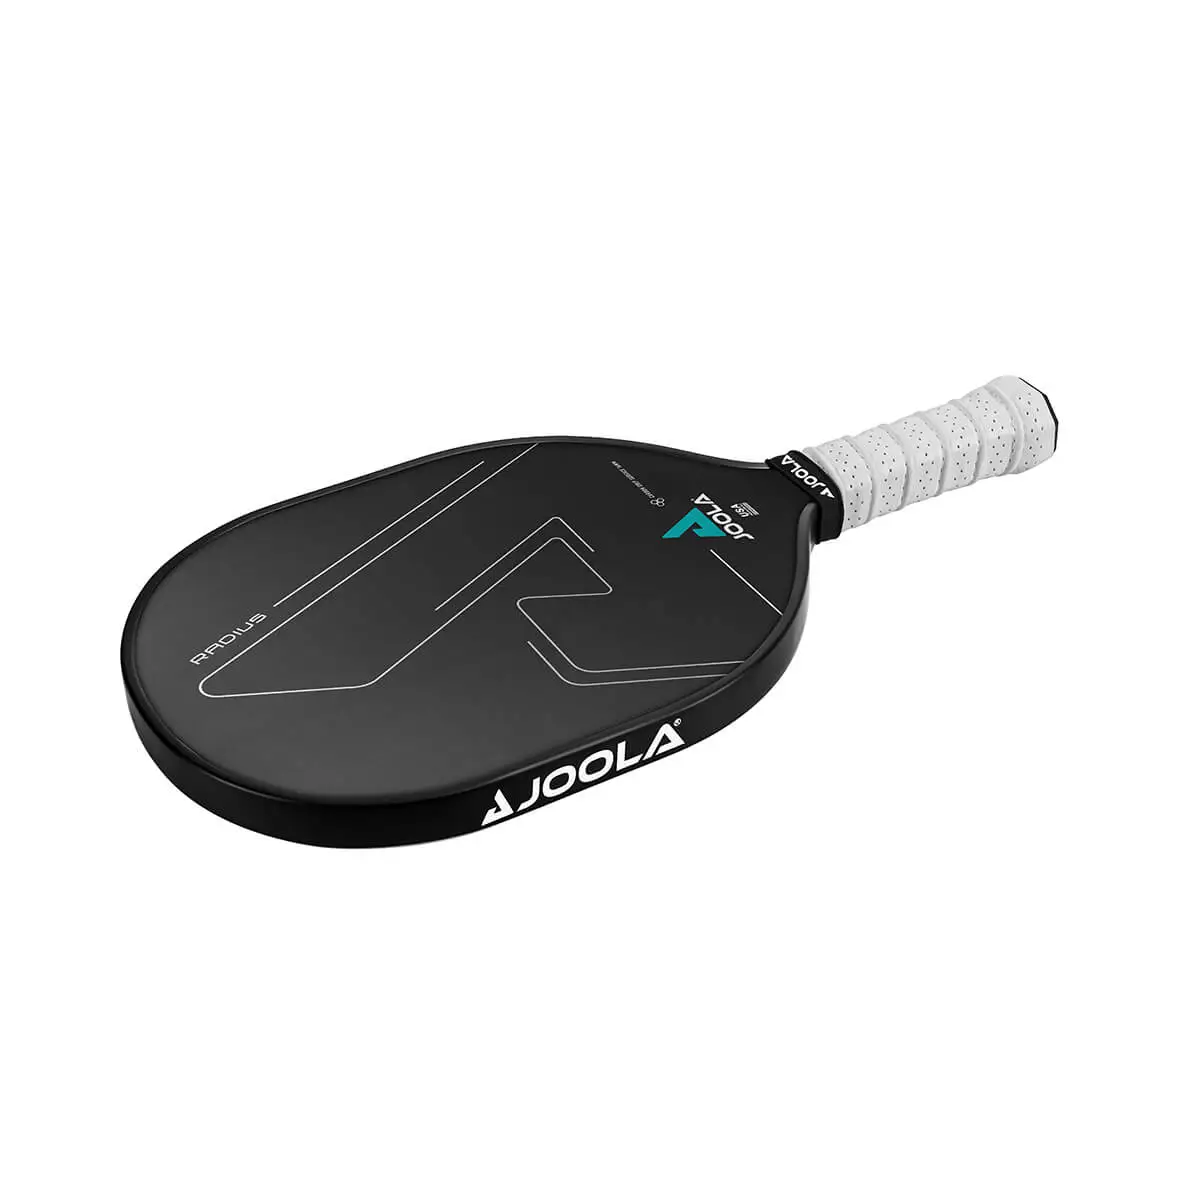 JOOLA Radius: The Ideal Paddle for Table Tennis Players